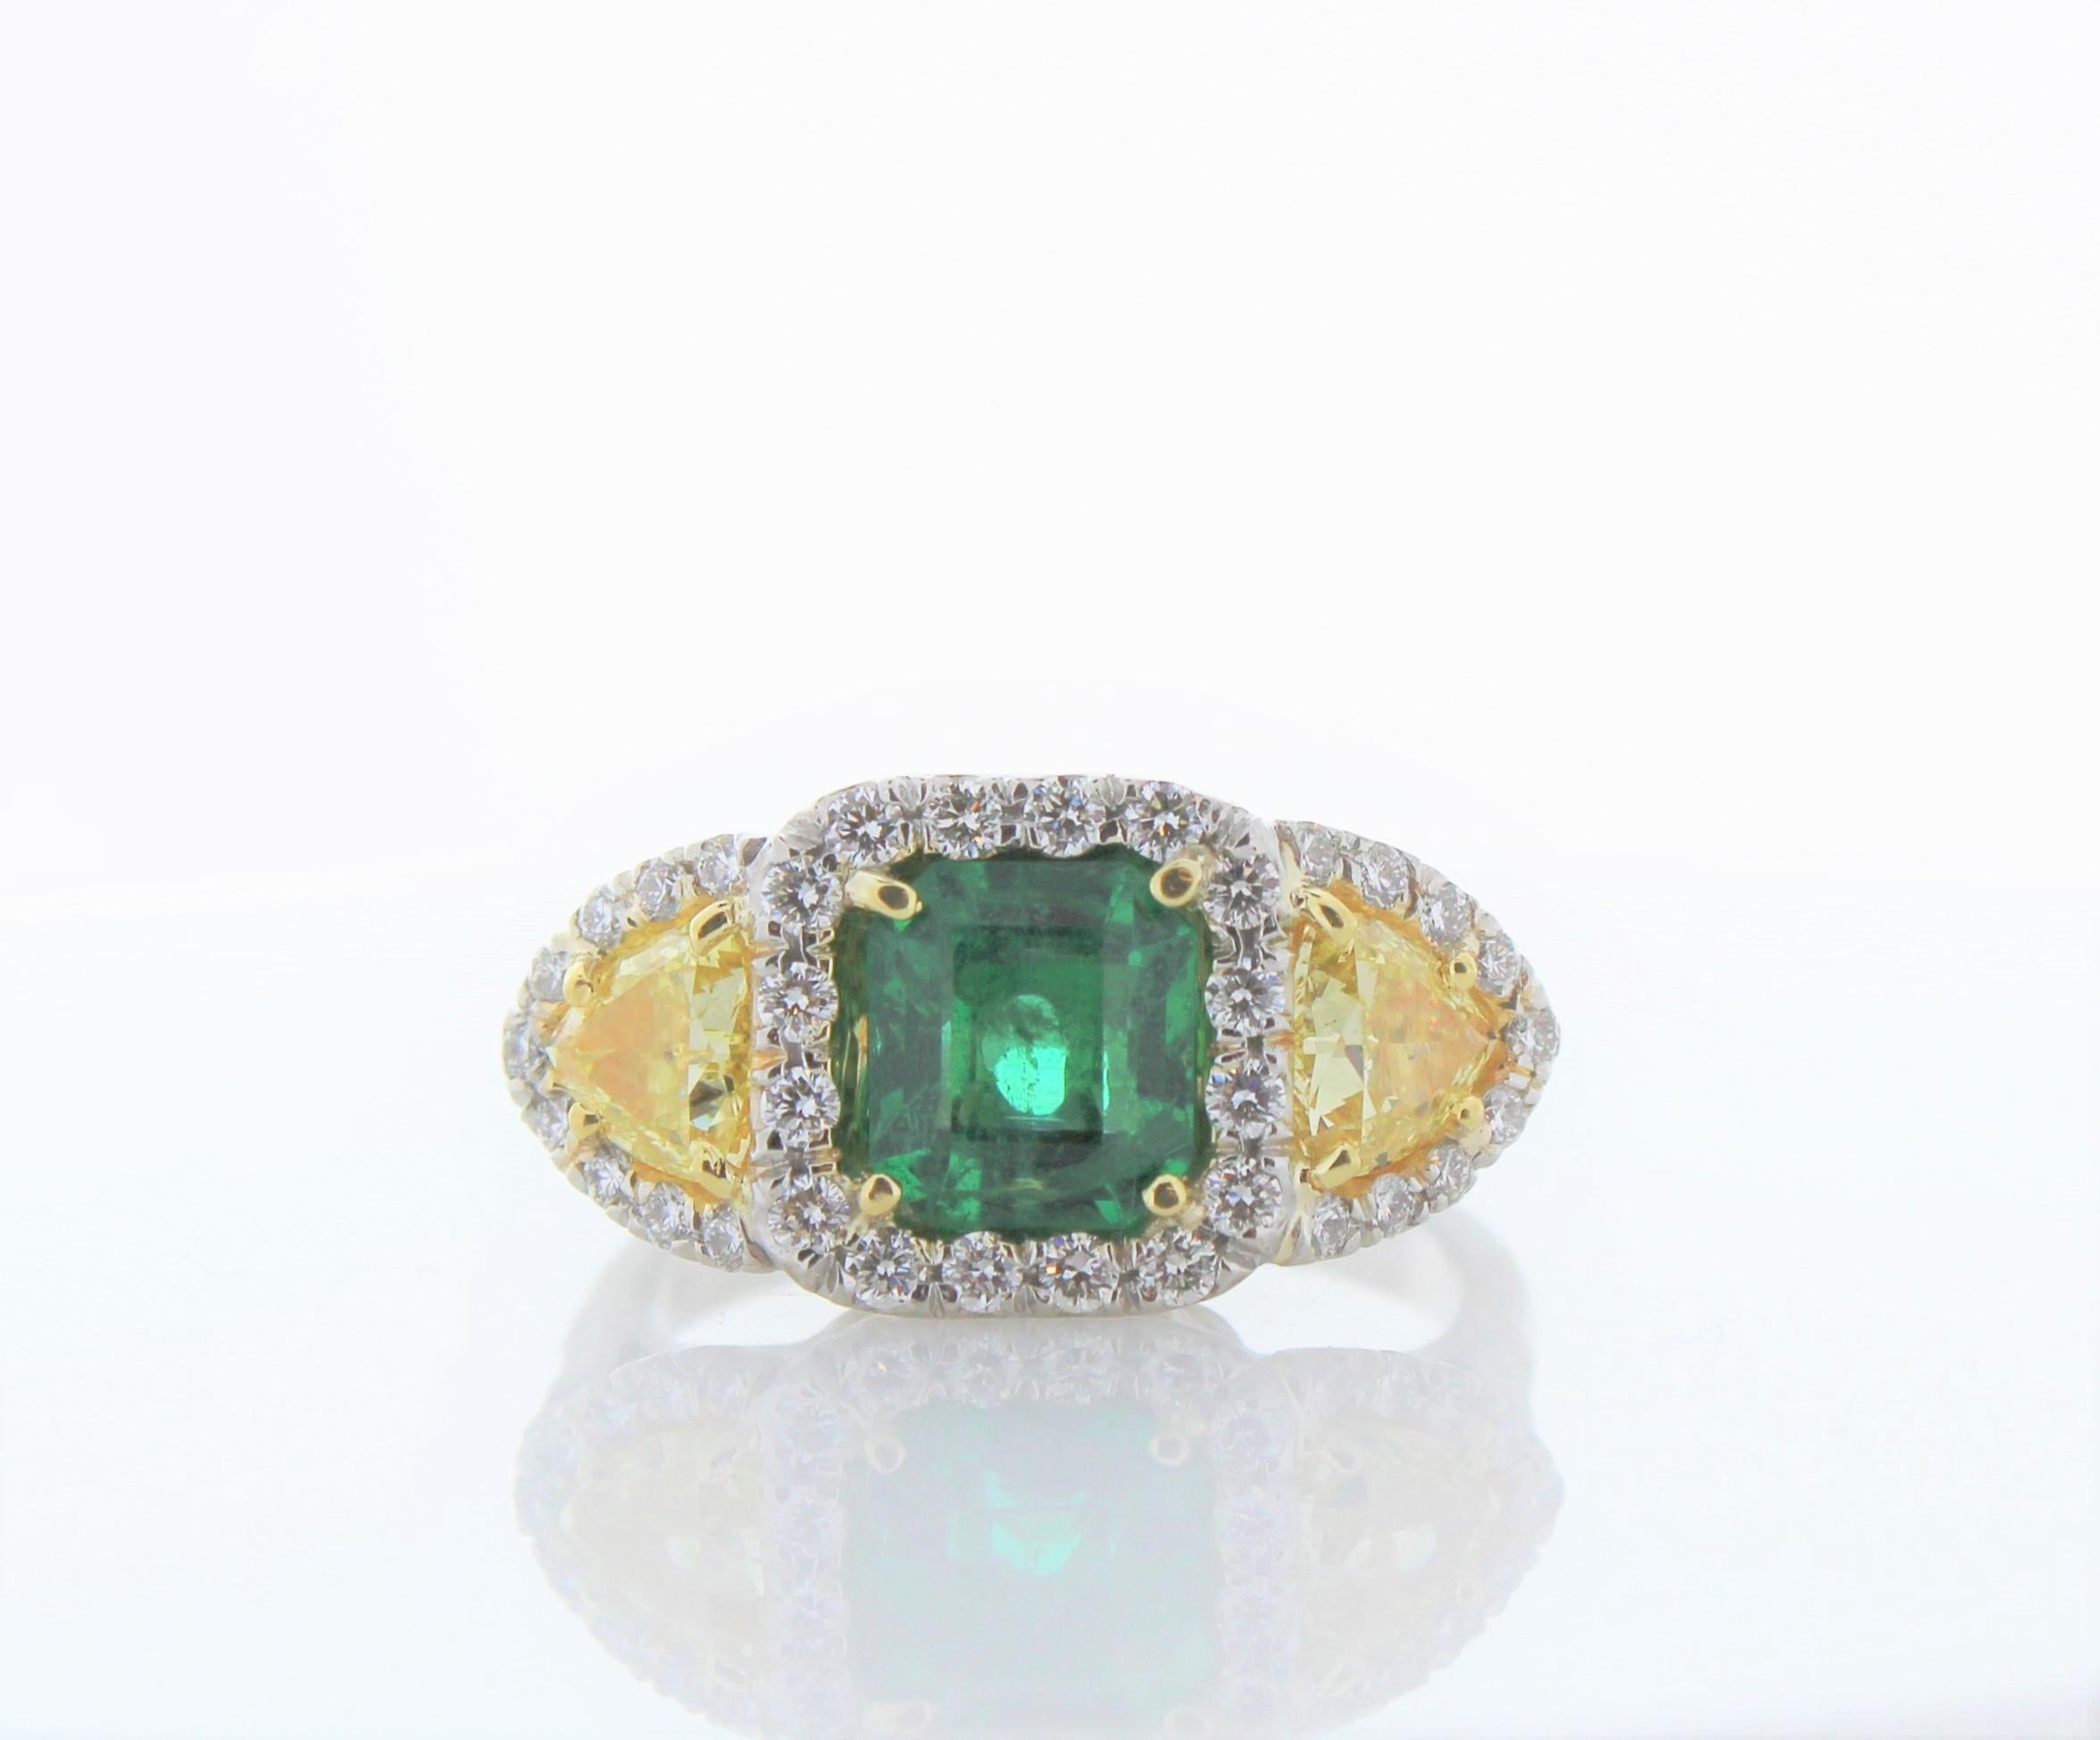 This ring features a deep grass green 1.52 carats. Its color is evenly distributed throughout the gem. Highlighting the majestic central emerald are two yellow diamonds and round brilliant diamonds totaling up to 1.67 carats. Set in platinum, this